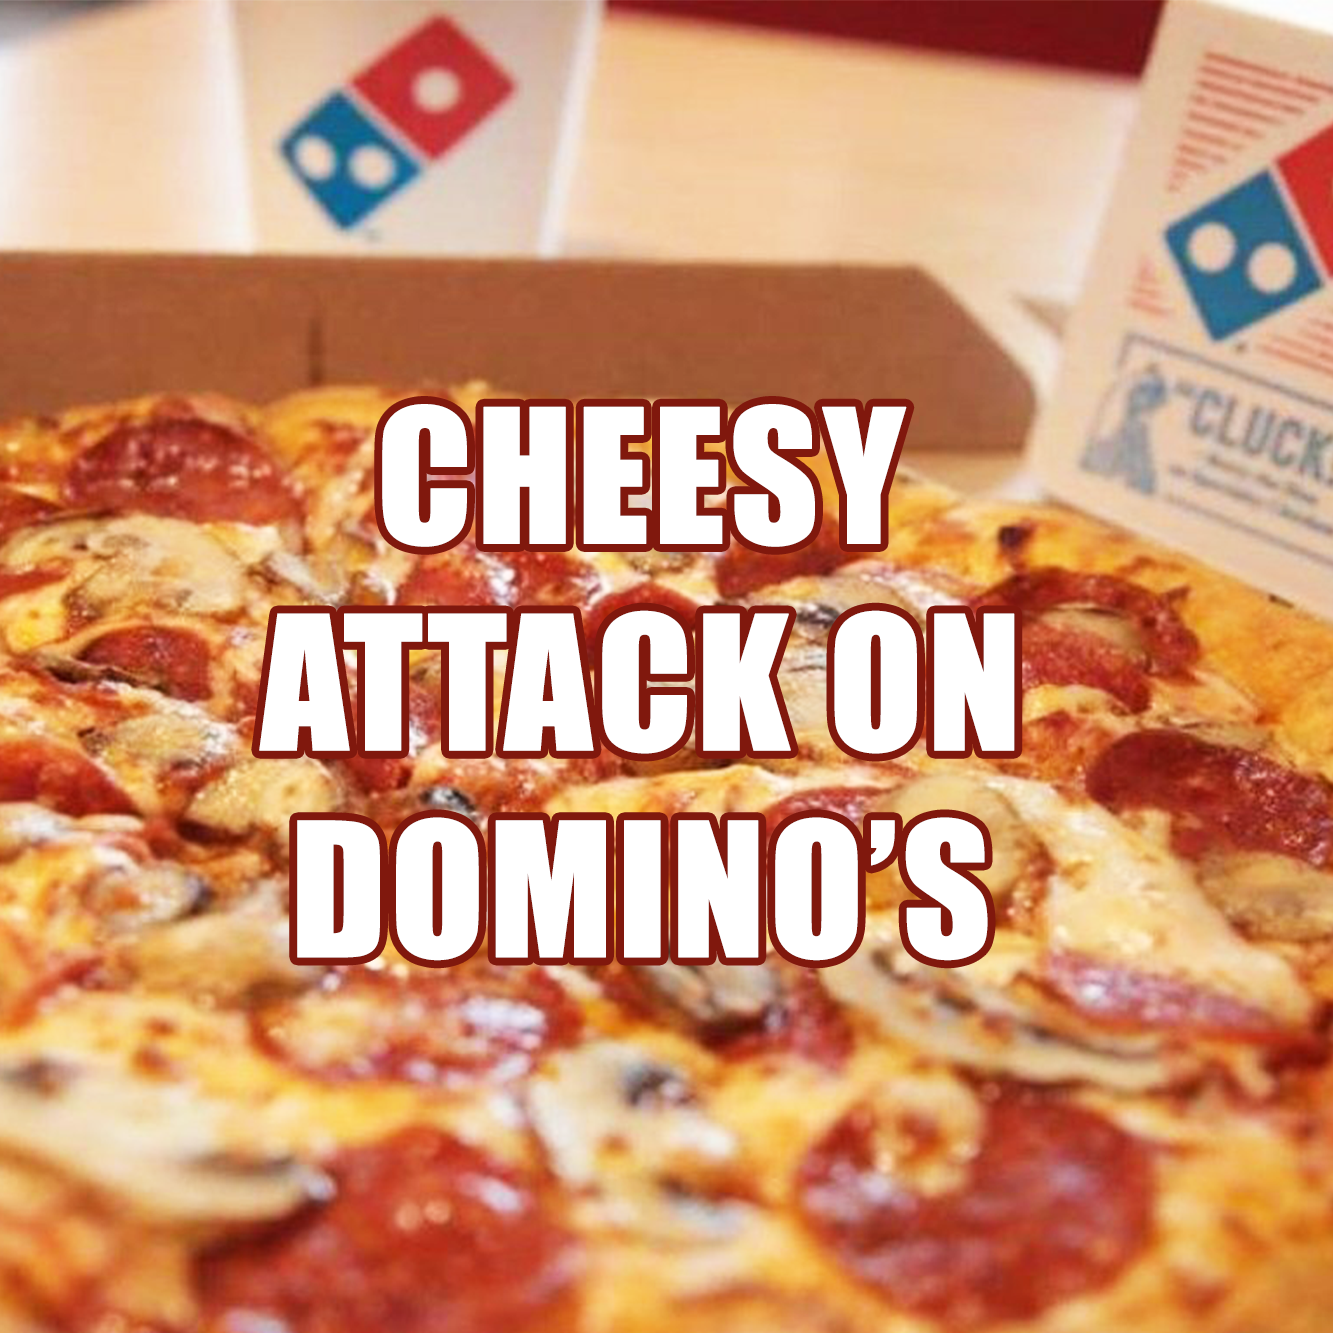 dominos databased hacked